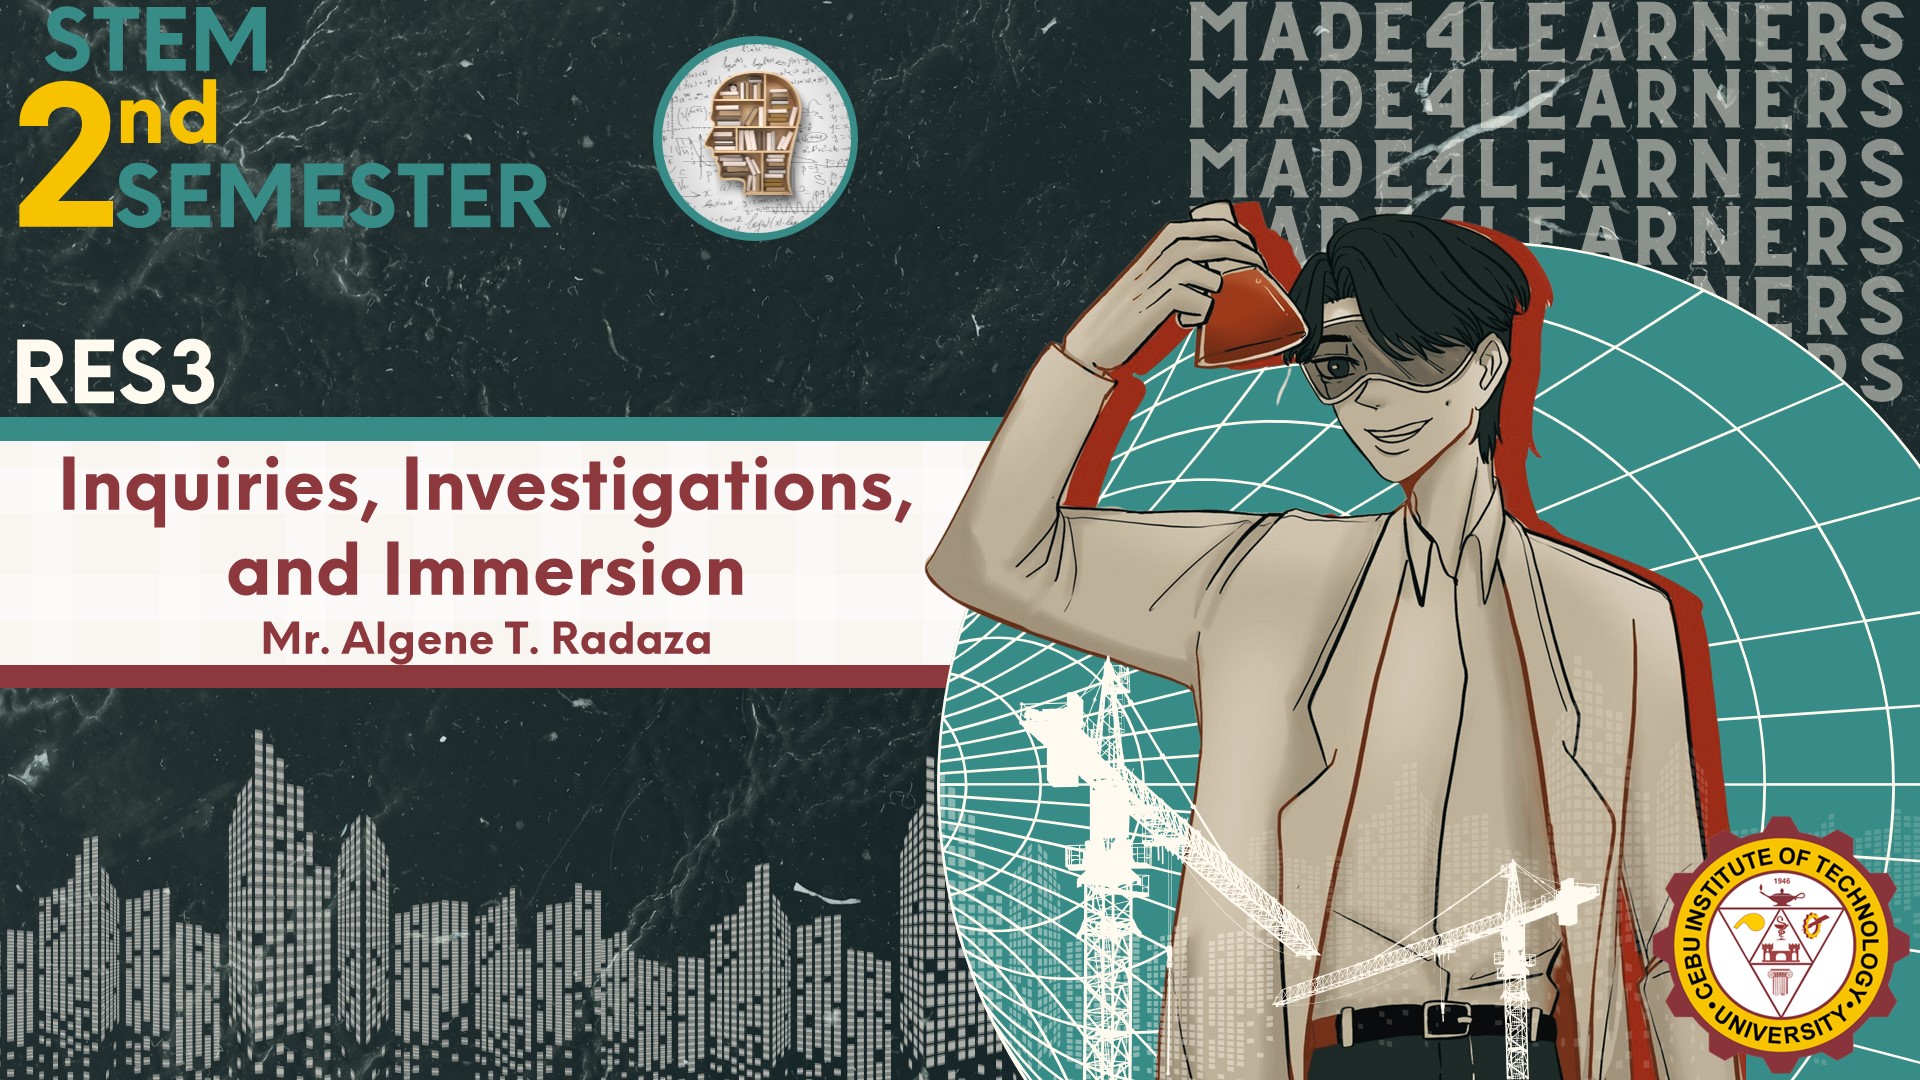 RES3: Research Inquiries, Investigations and Immersion (Radaza)